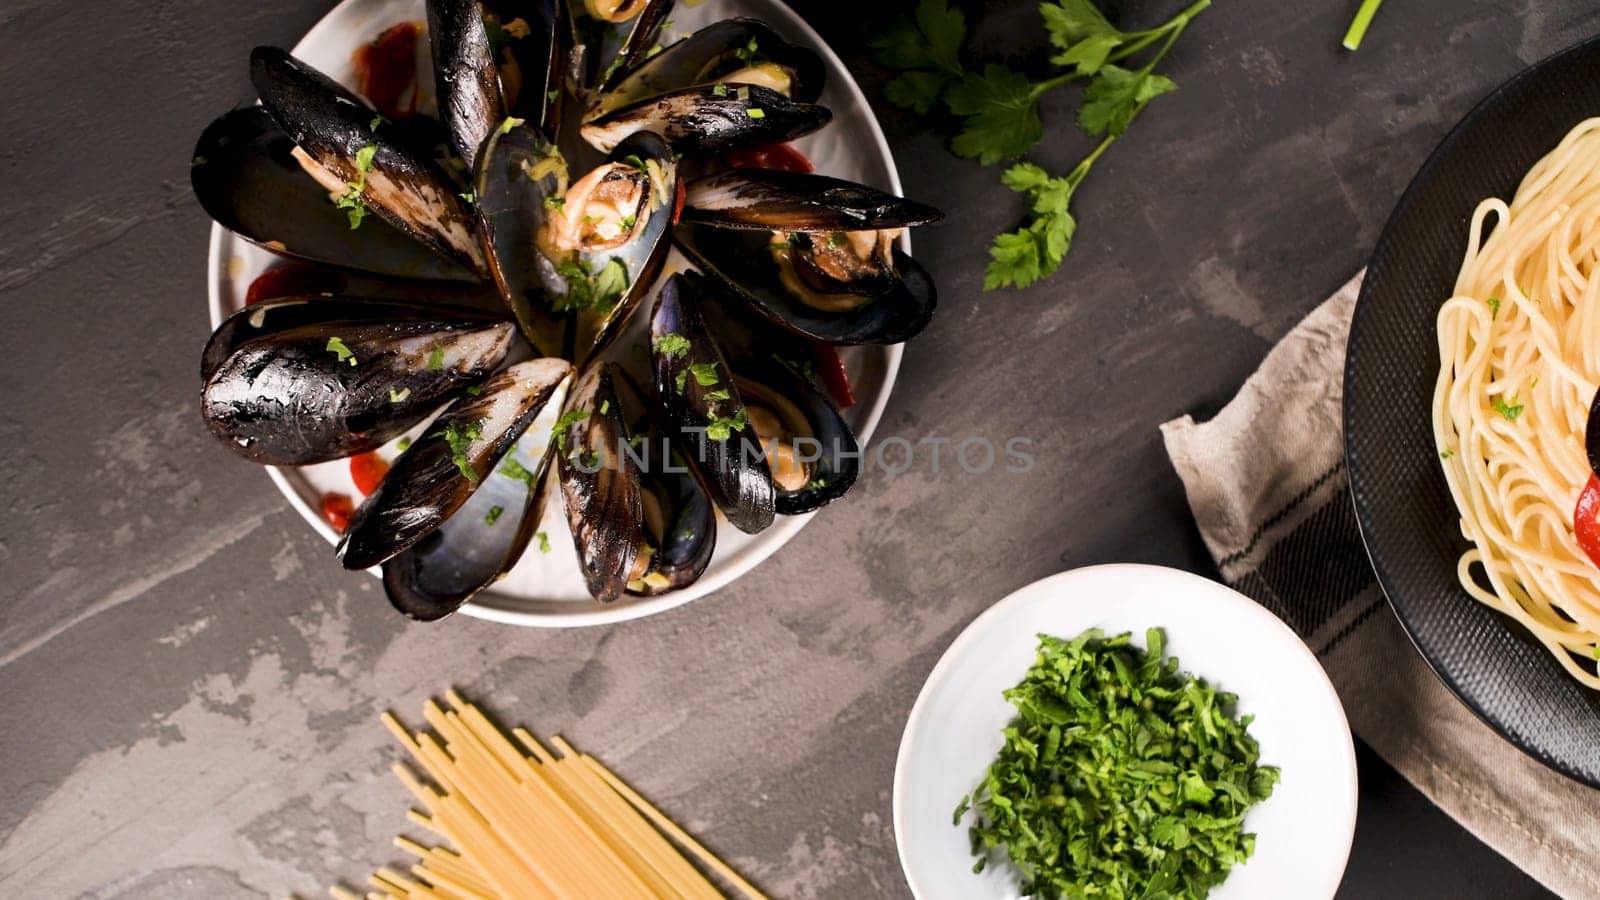 Homemade pasta spaghetti with mussels by homydesign